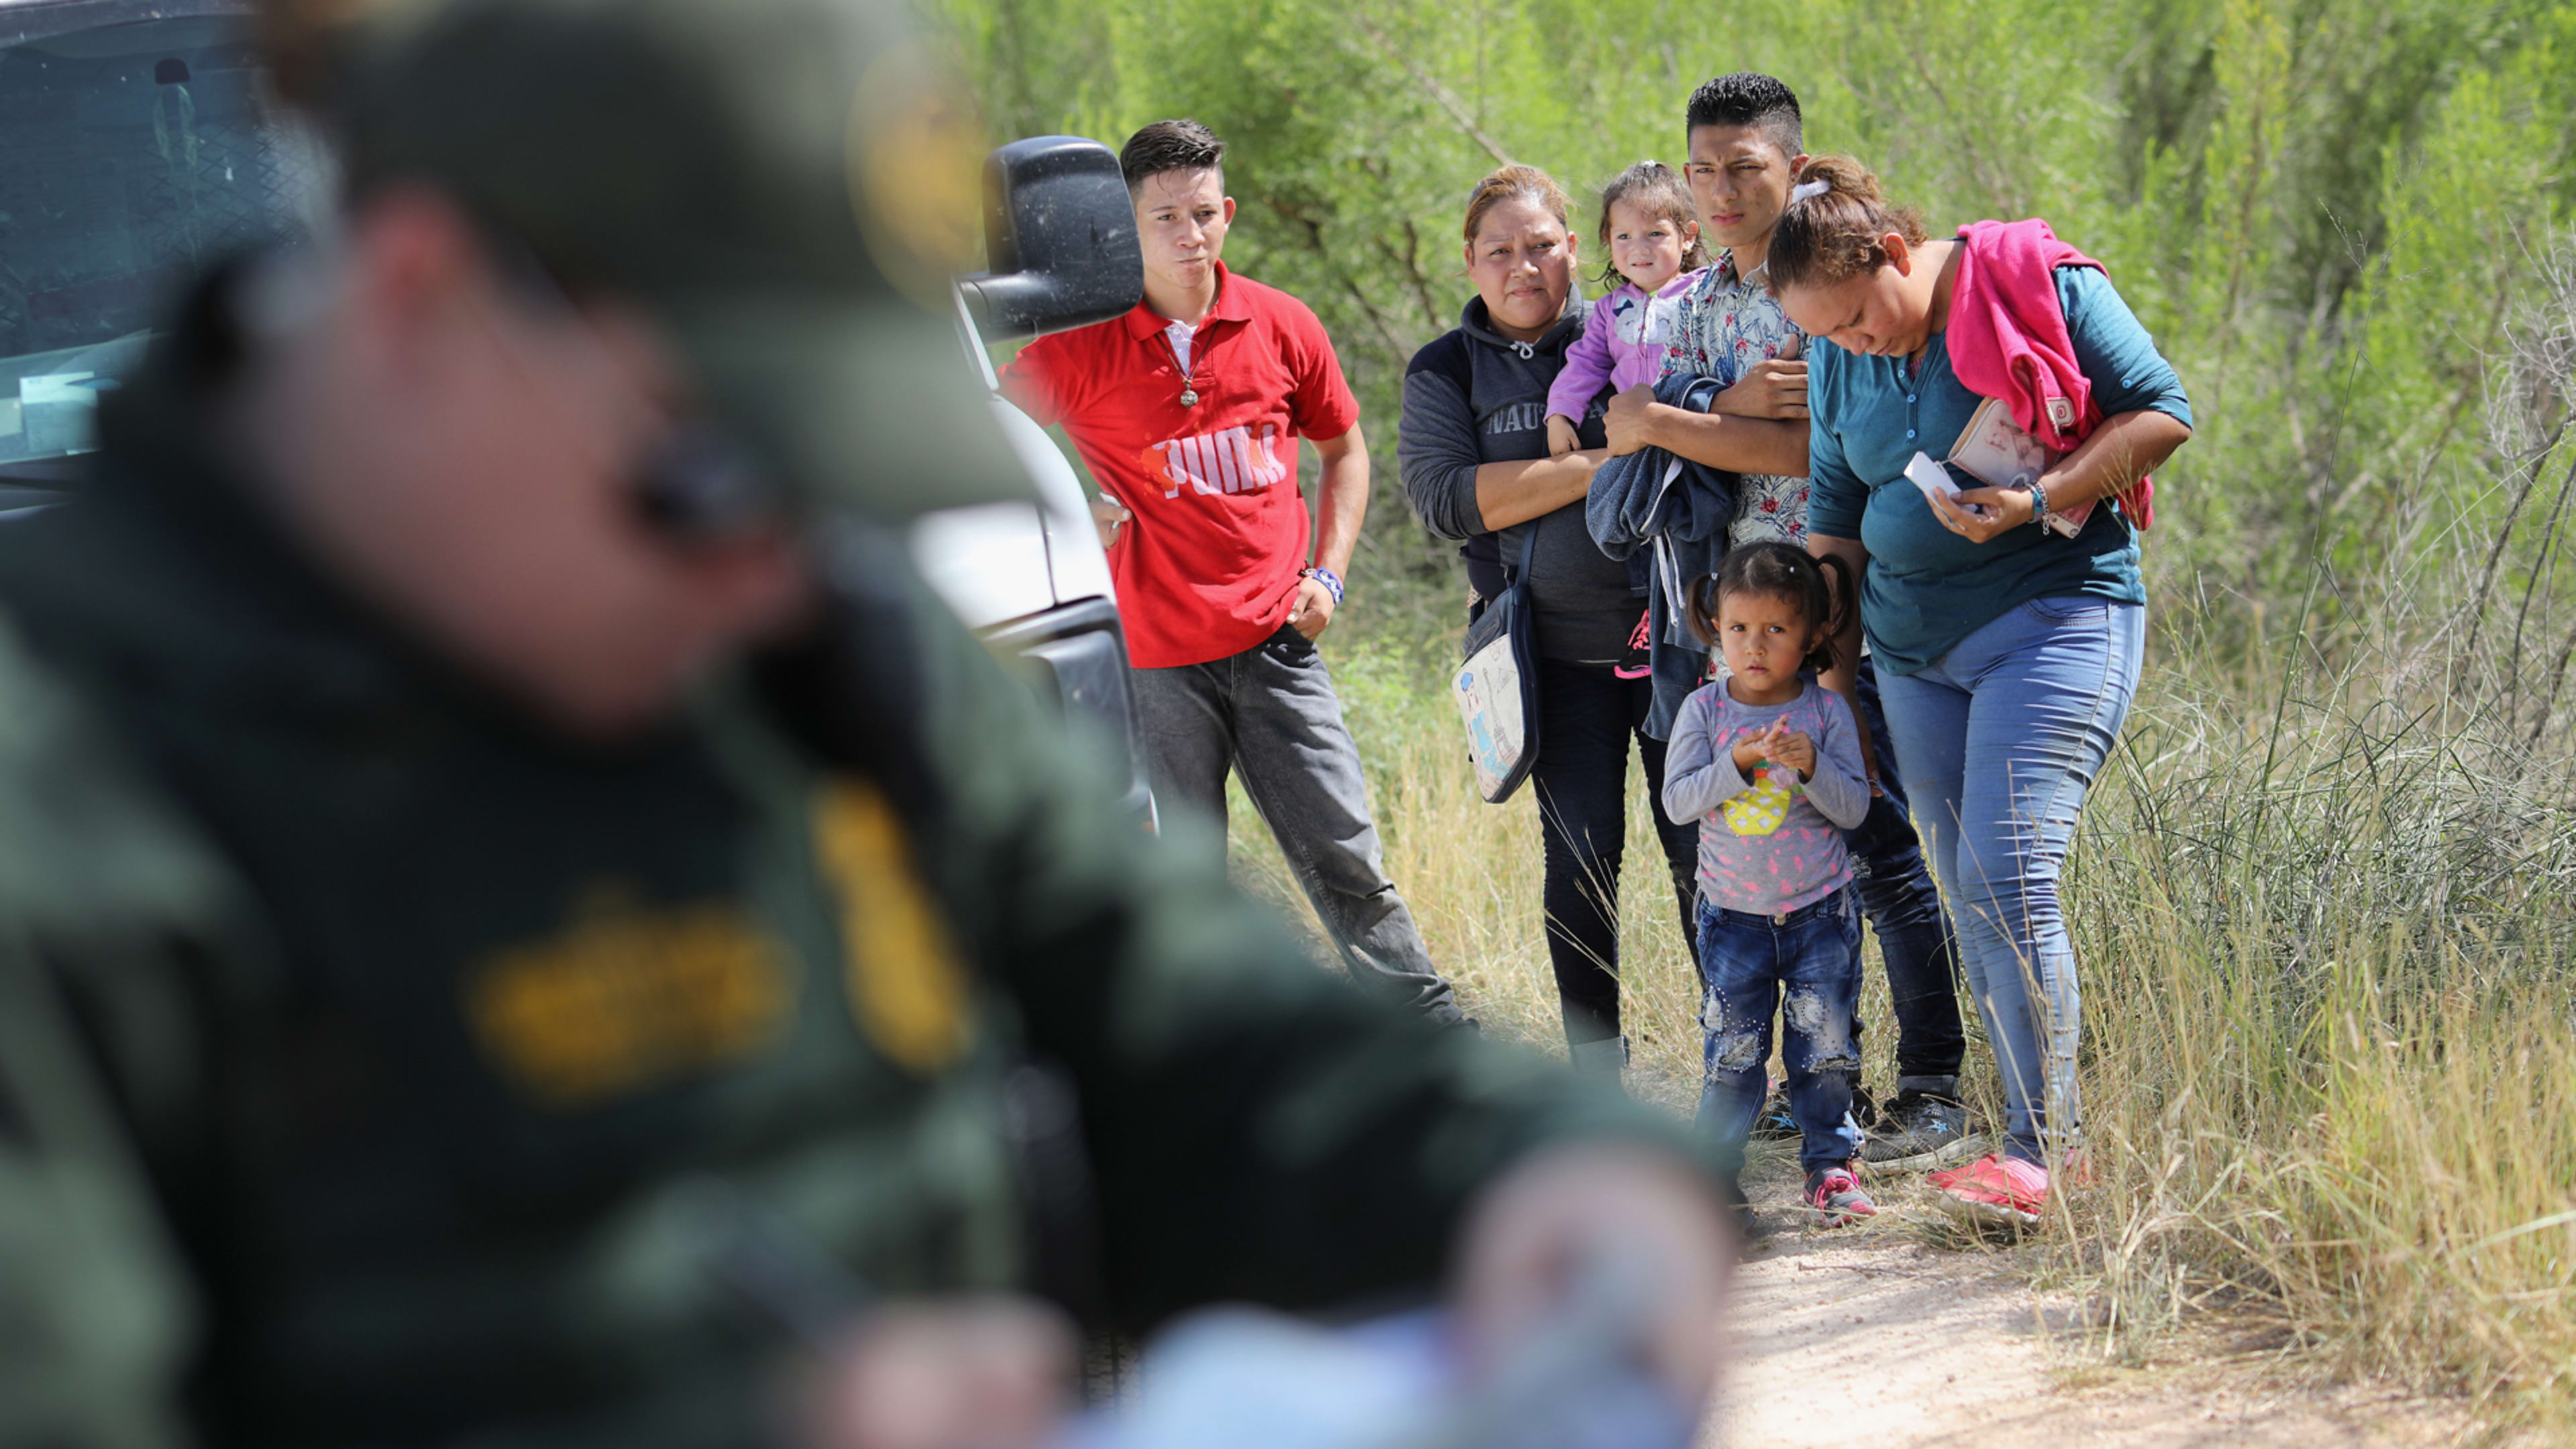 How to help separated families: 5 things you can do that take less than 5 minutes